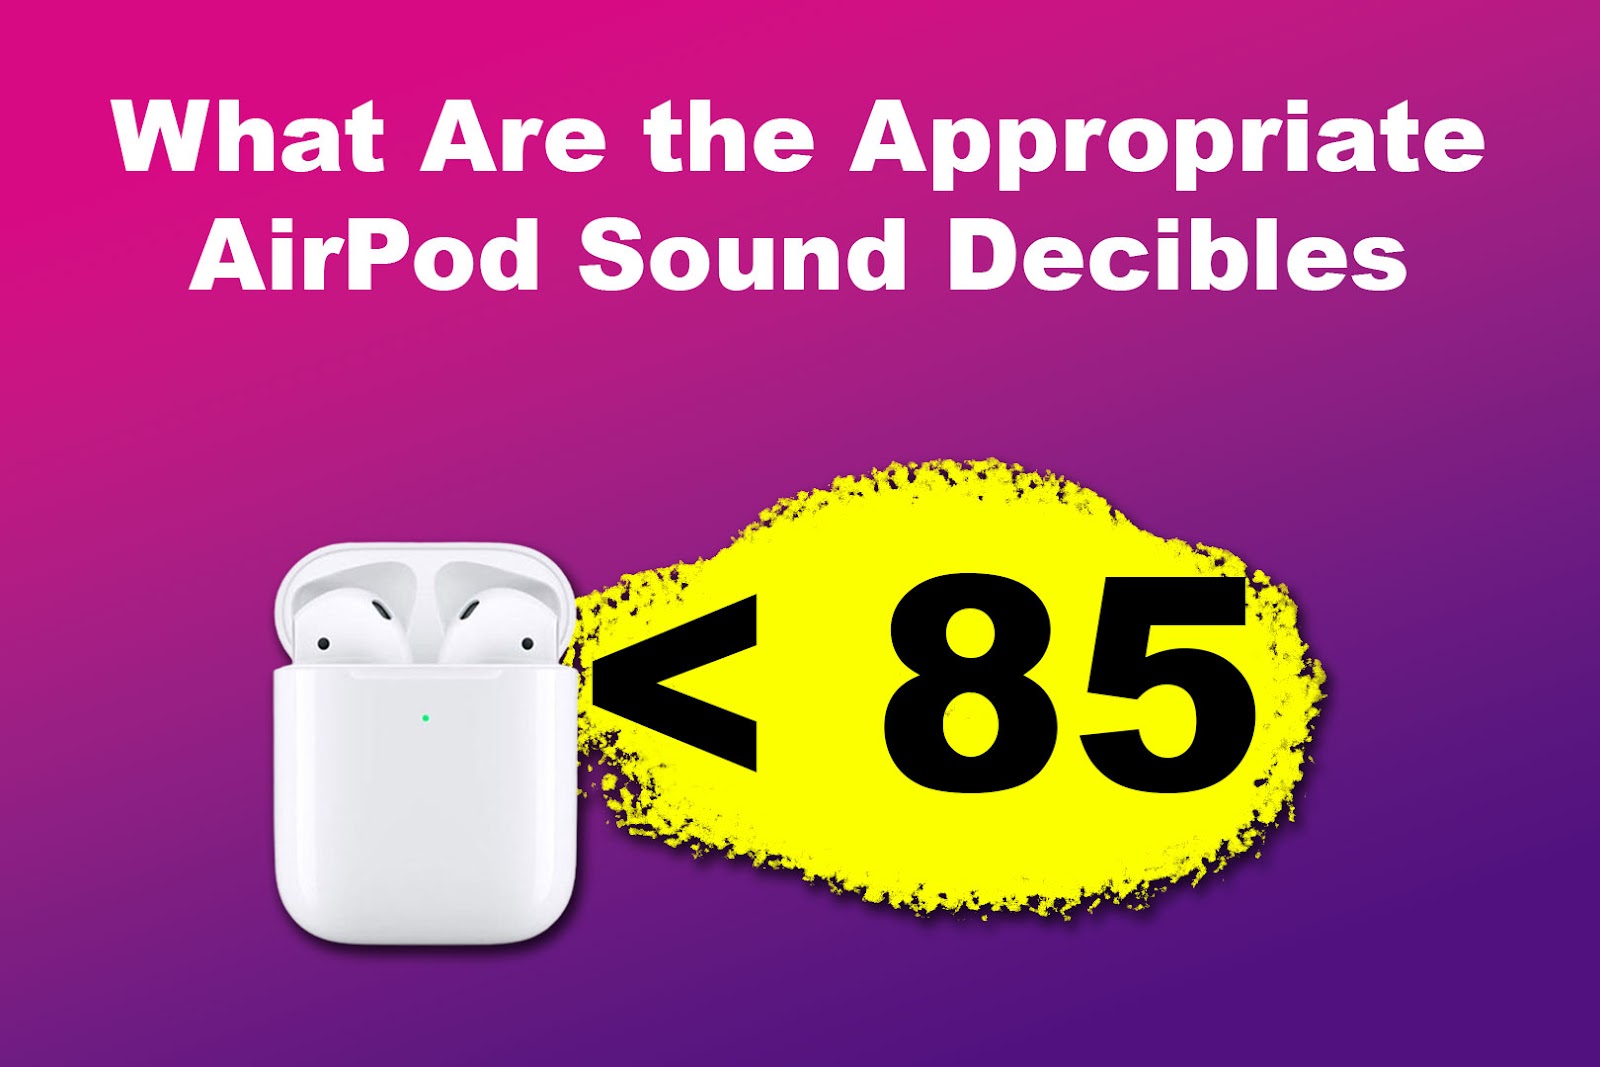 What Are the Appropriate AirPod Sound Decibles